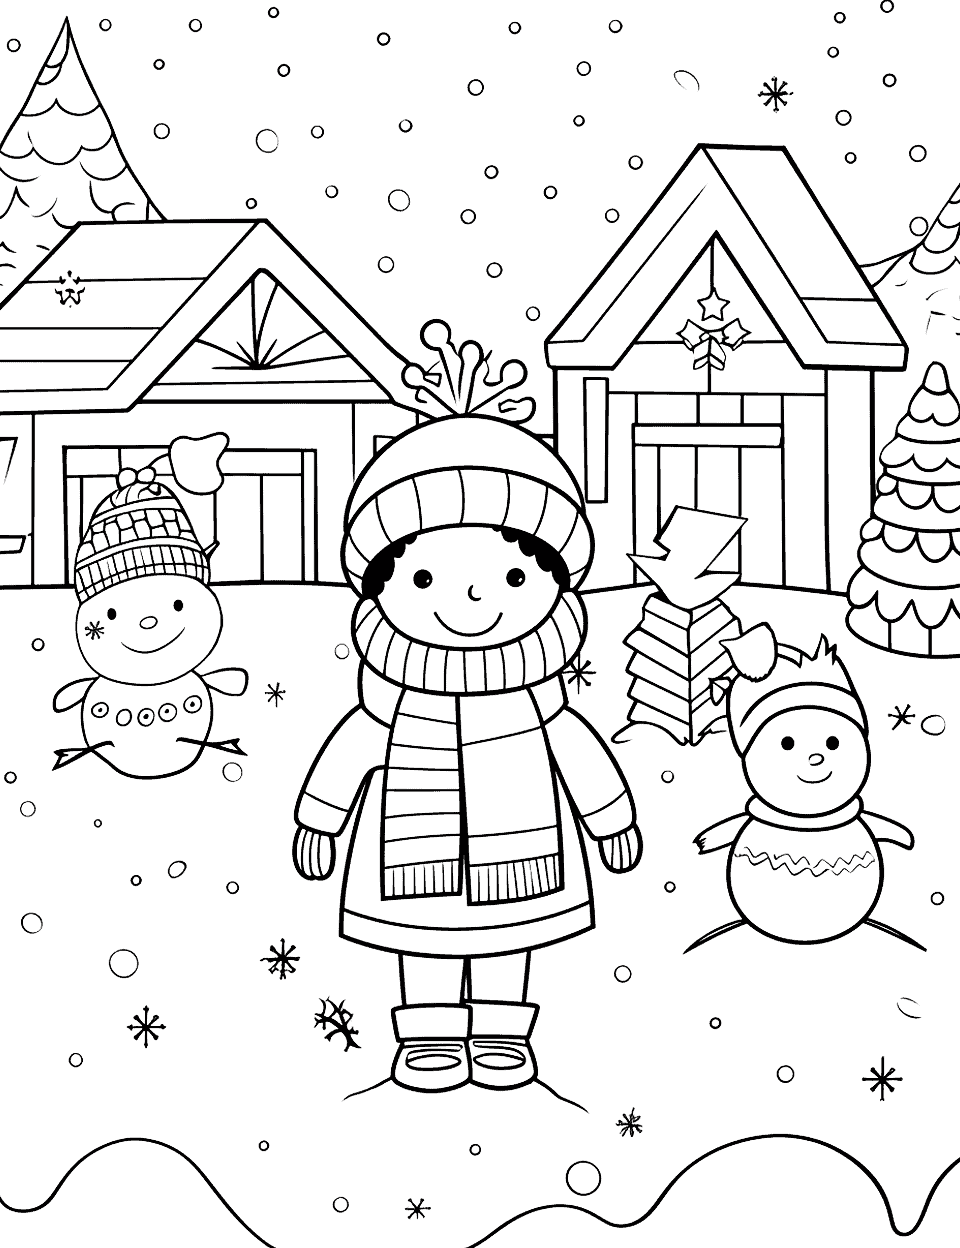 First Grade Winter Festival Coloring Page - First-grade students enjoying a winter festival at school.